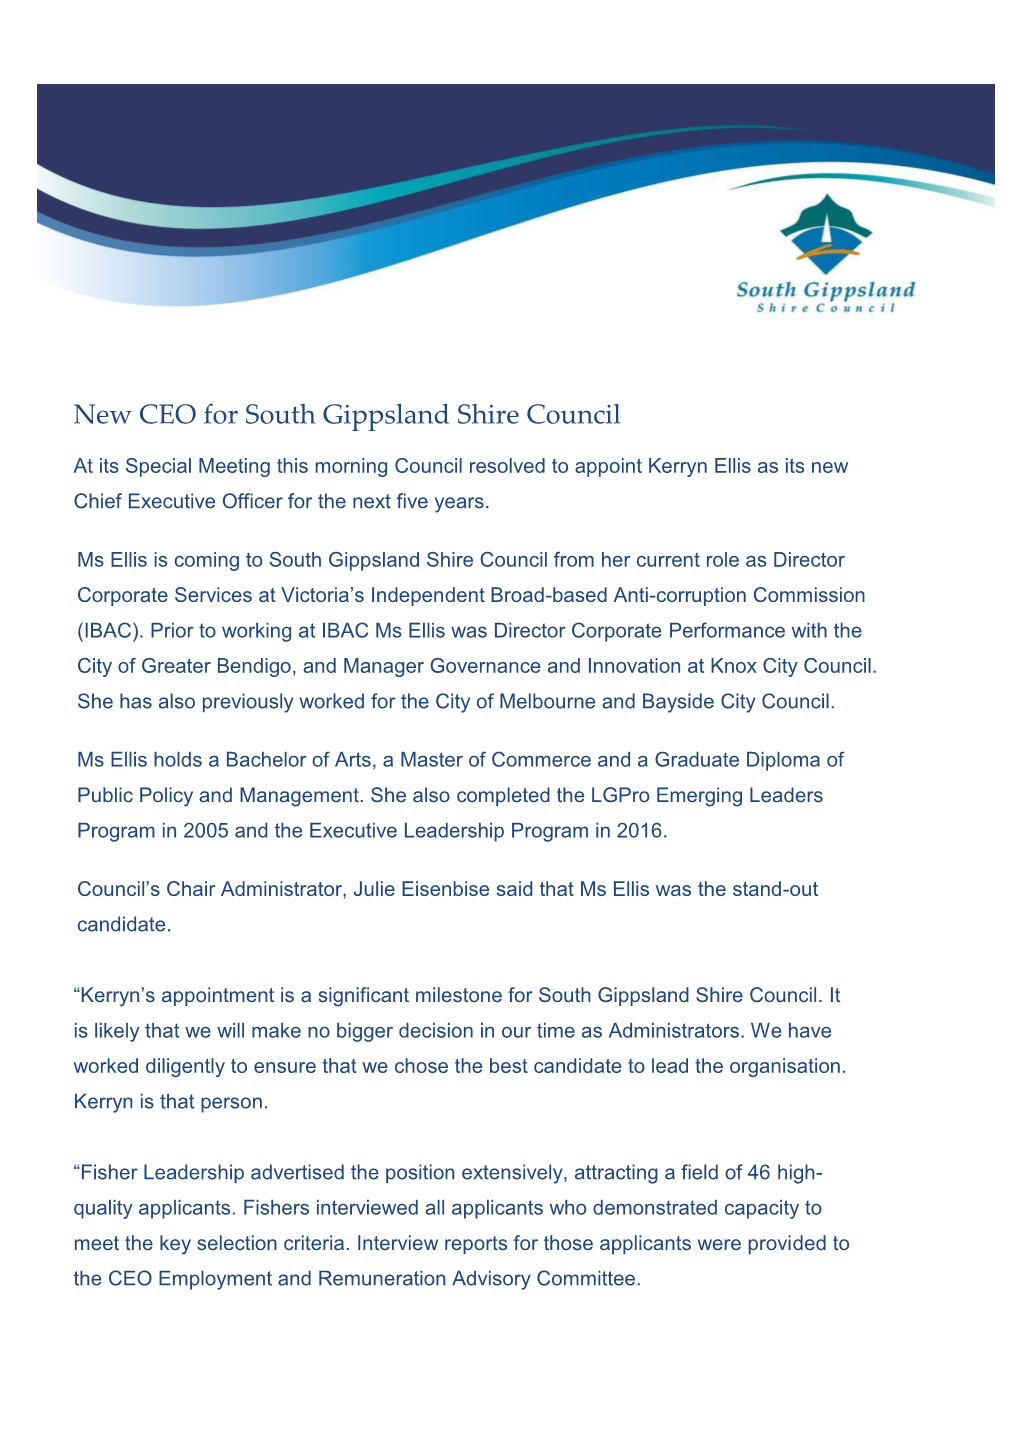 New CEO for South Gippsland Shire Council